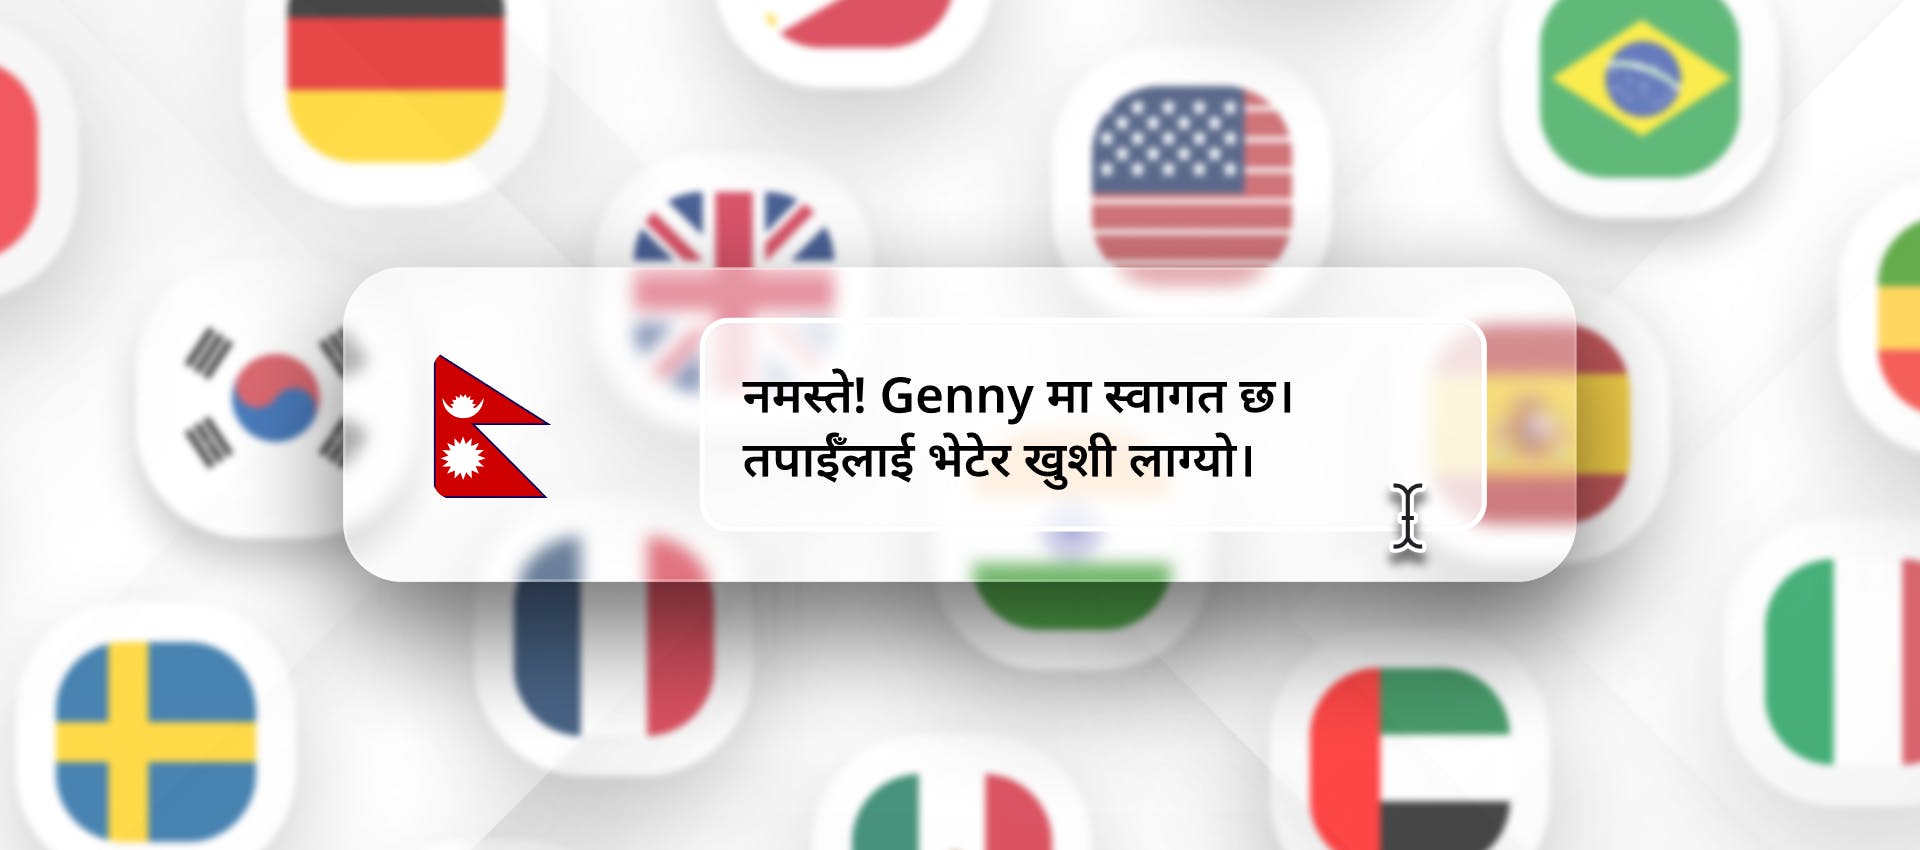 Nepali phrase for Nepali TTS generation with different flags in the background